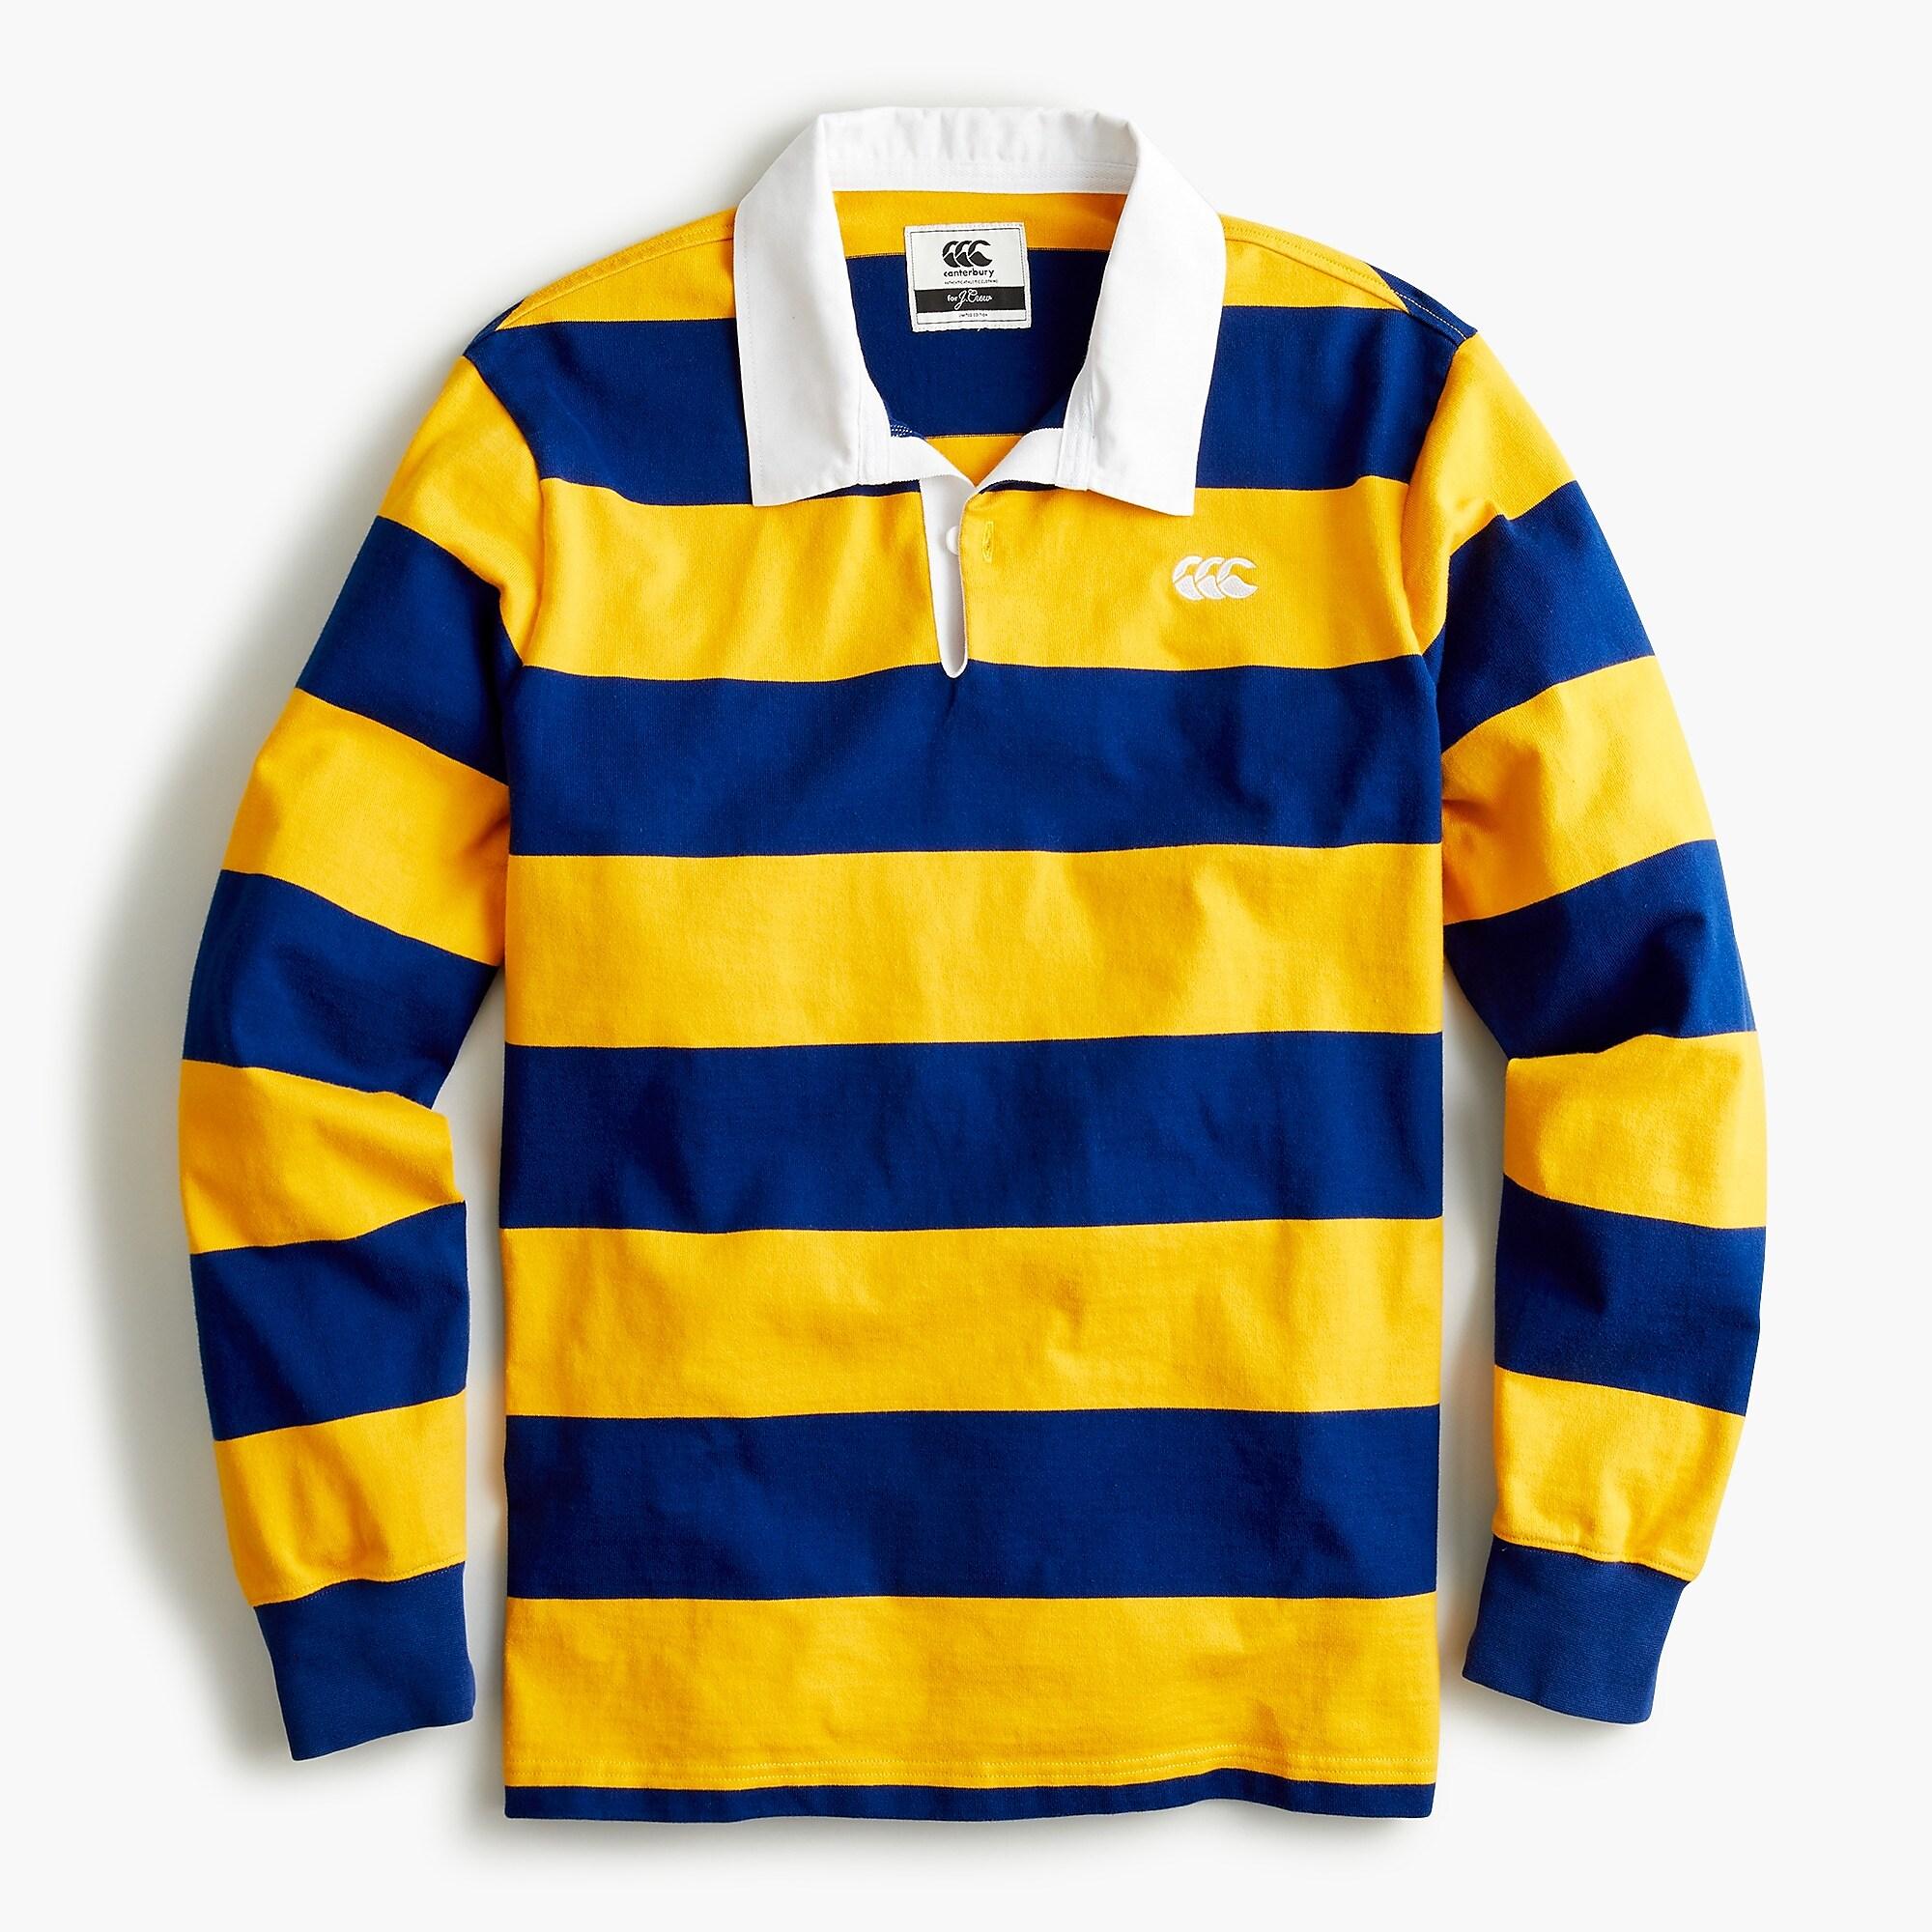 J.Crew Cotton Editions X Canterbury Rugby Shirt in Blue for Men - Lyst